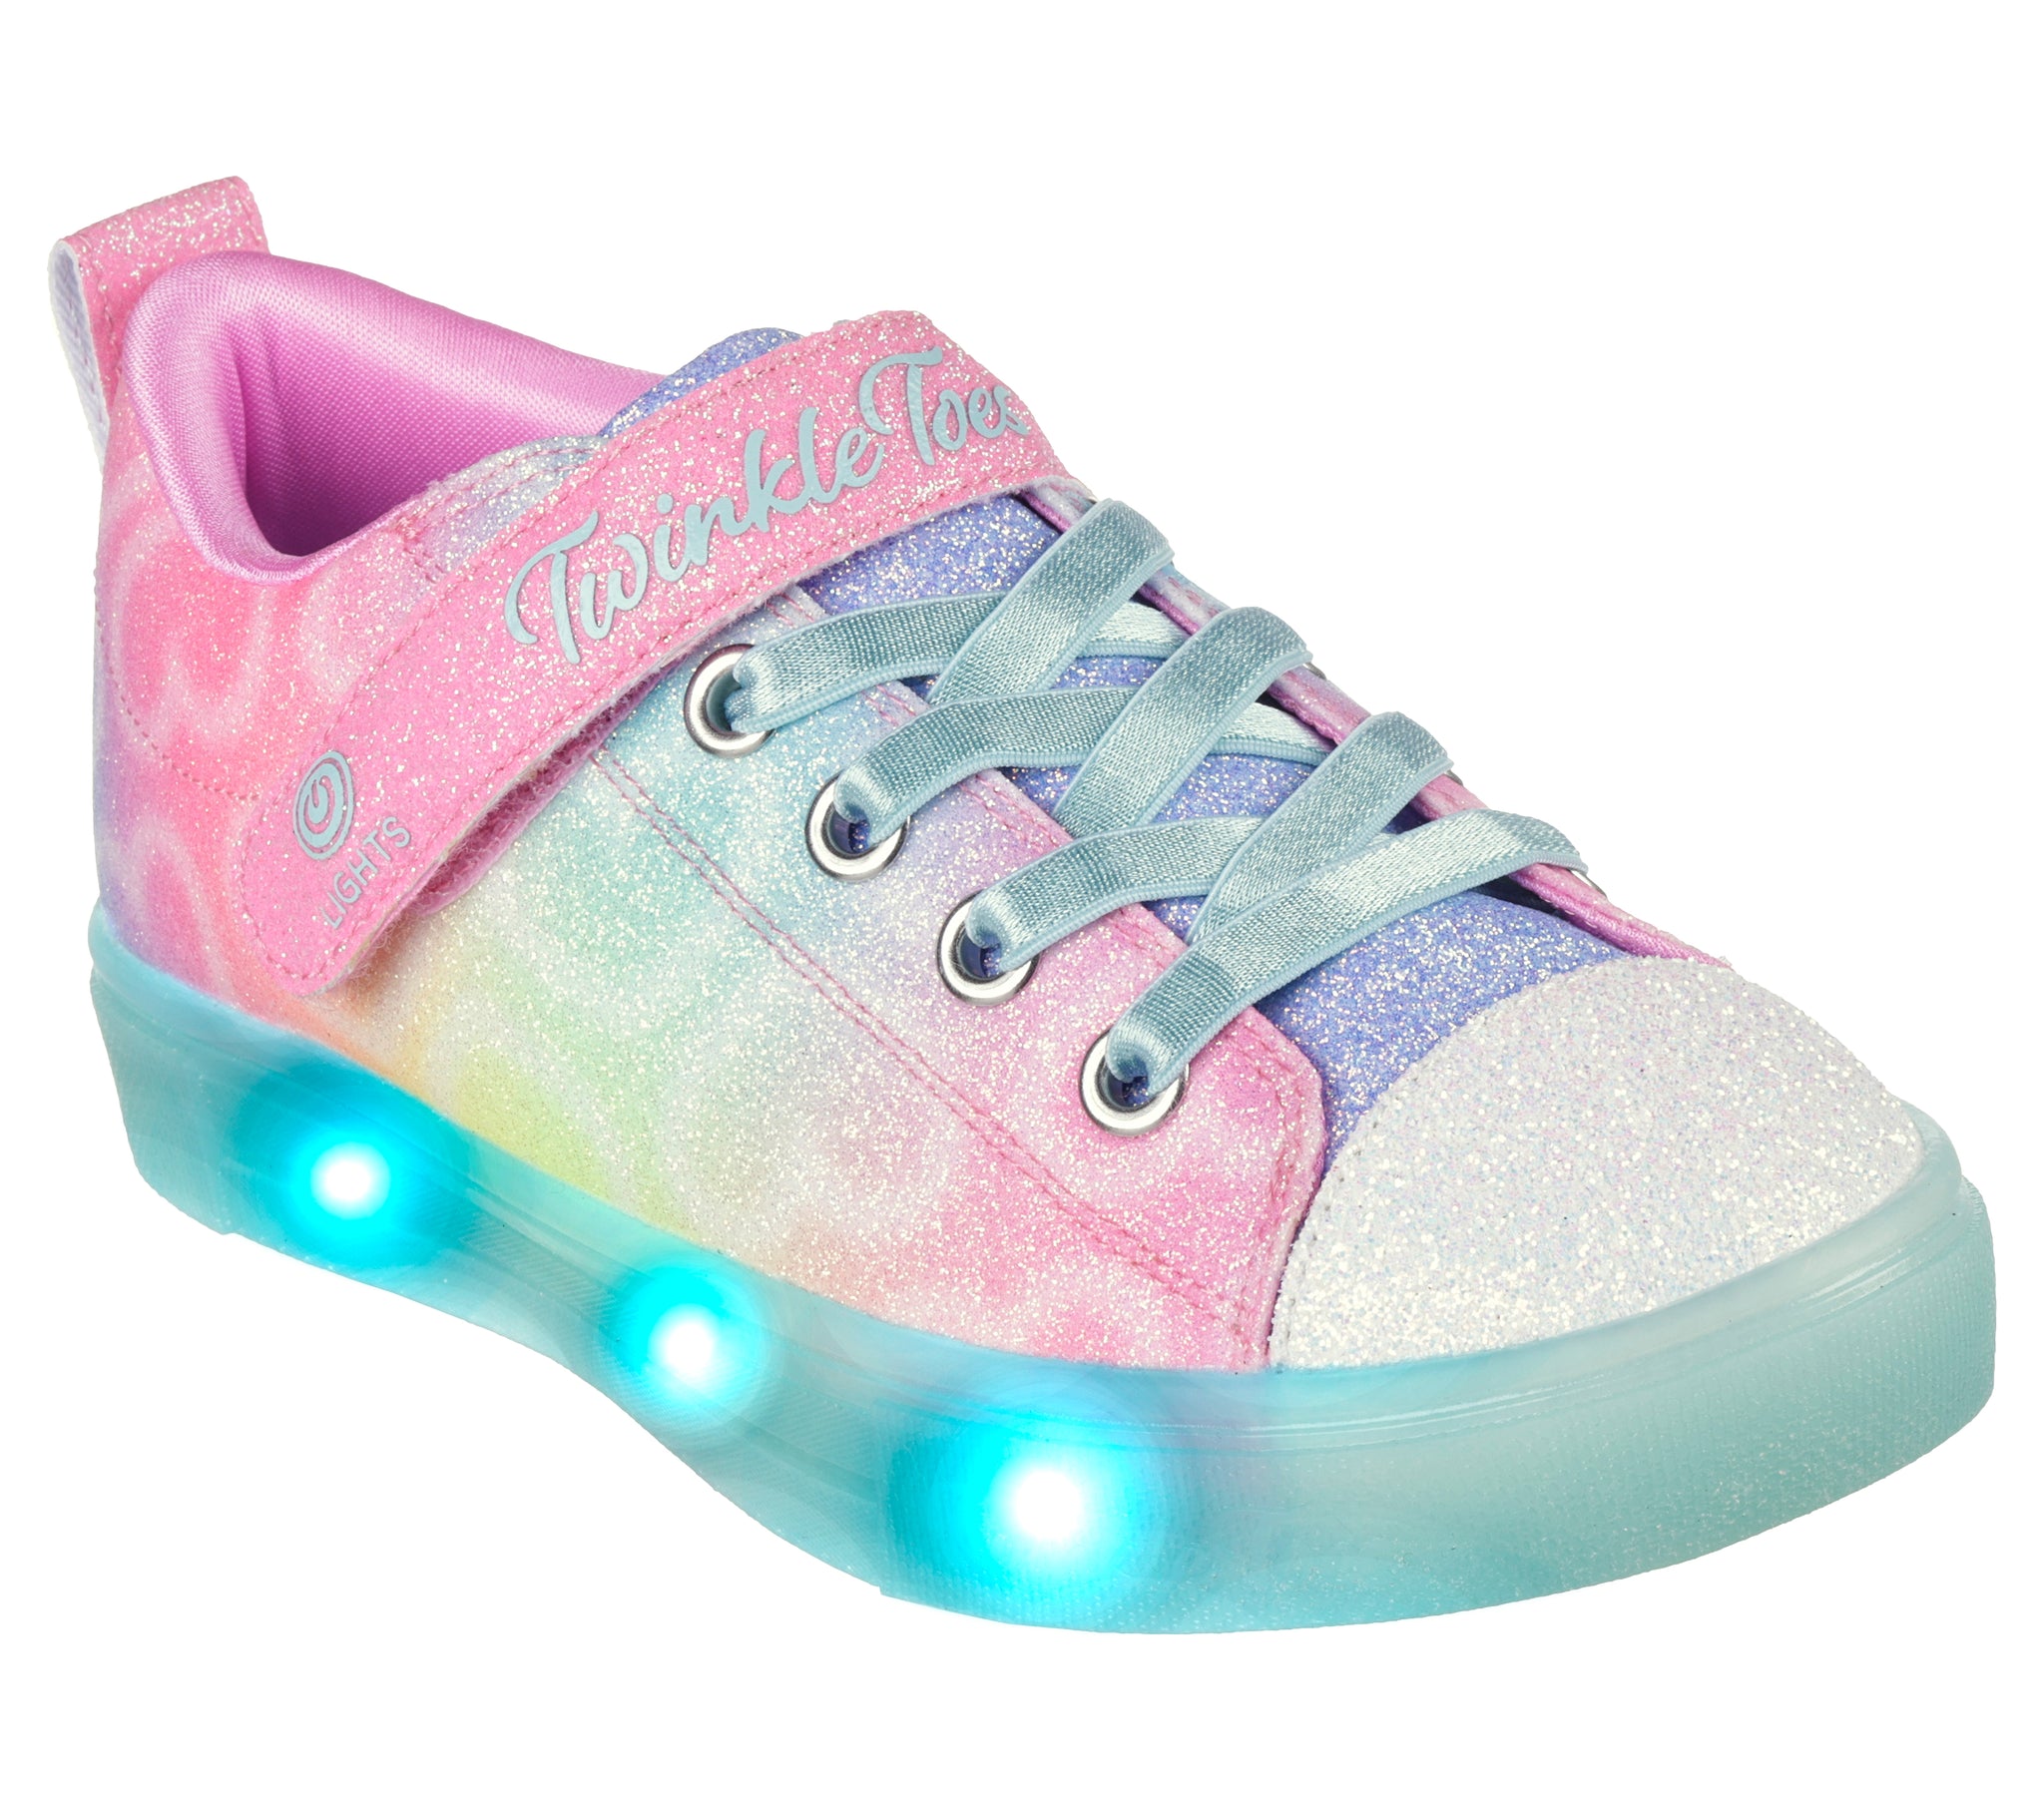 314782L - TWINKLE SPARKS ICE - DREAMSICLE